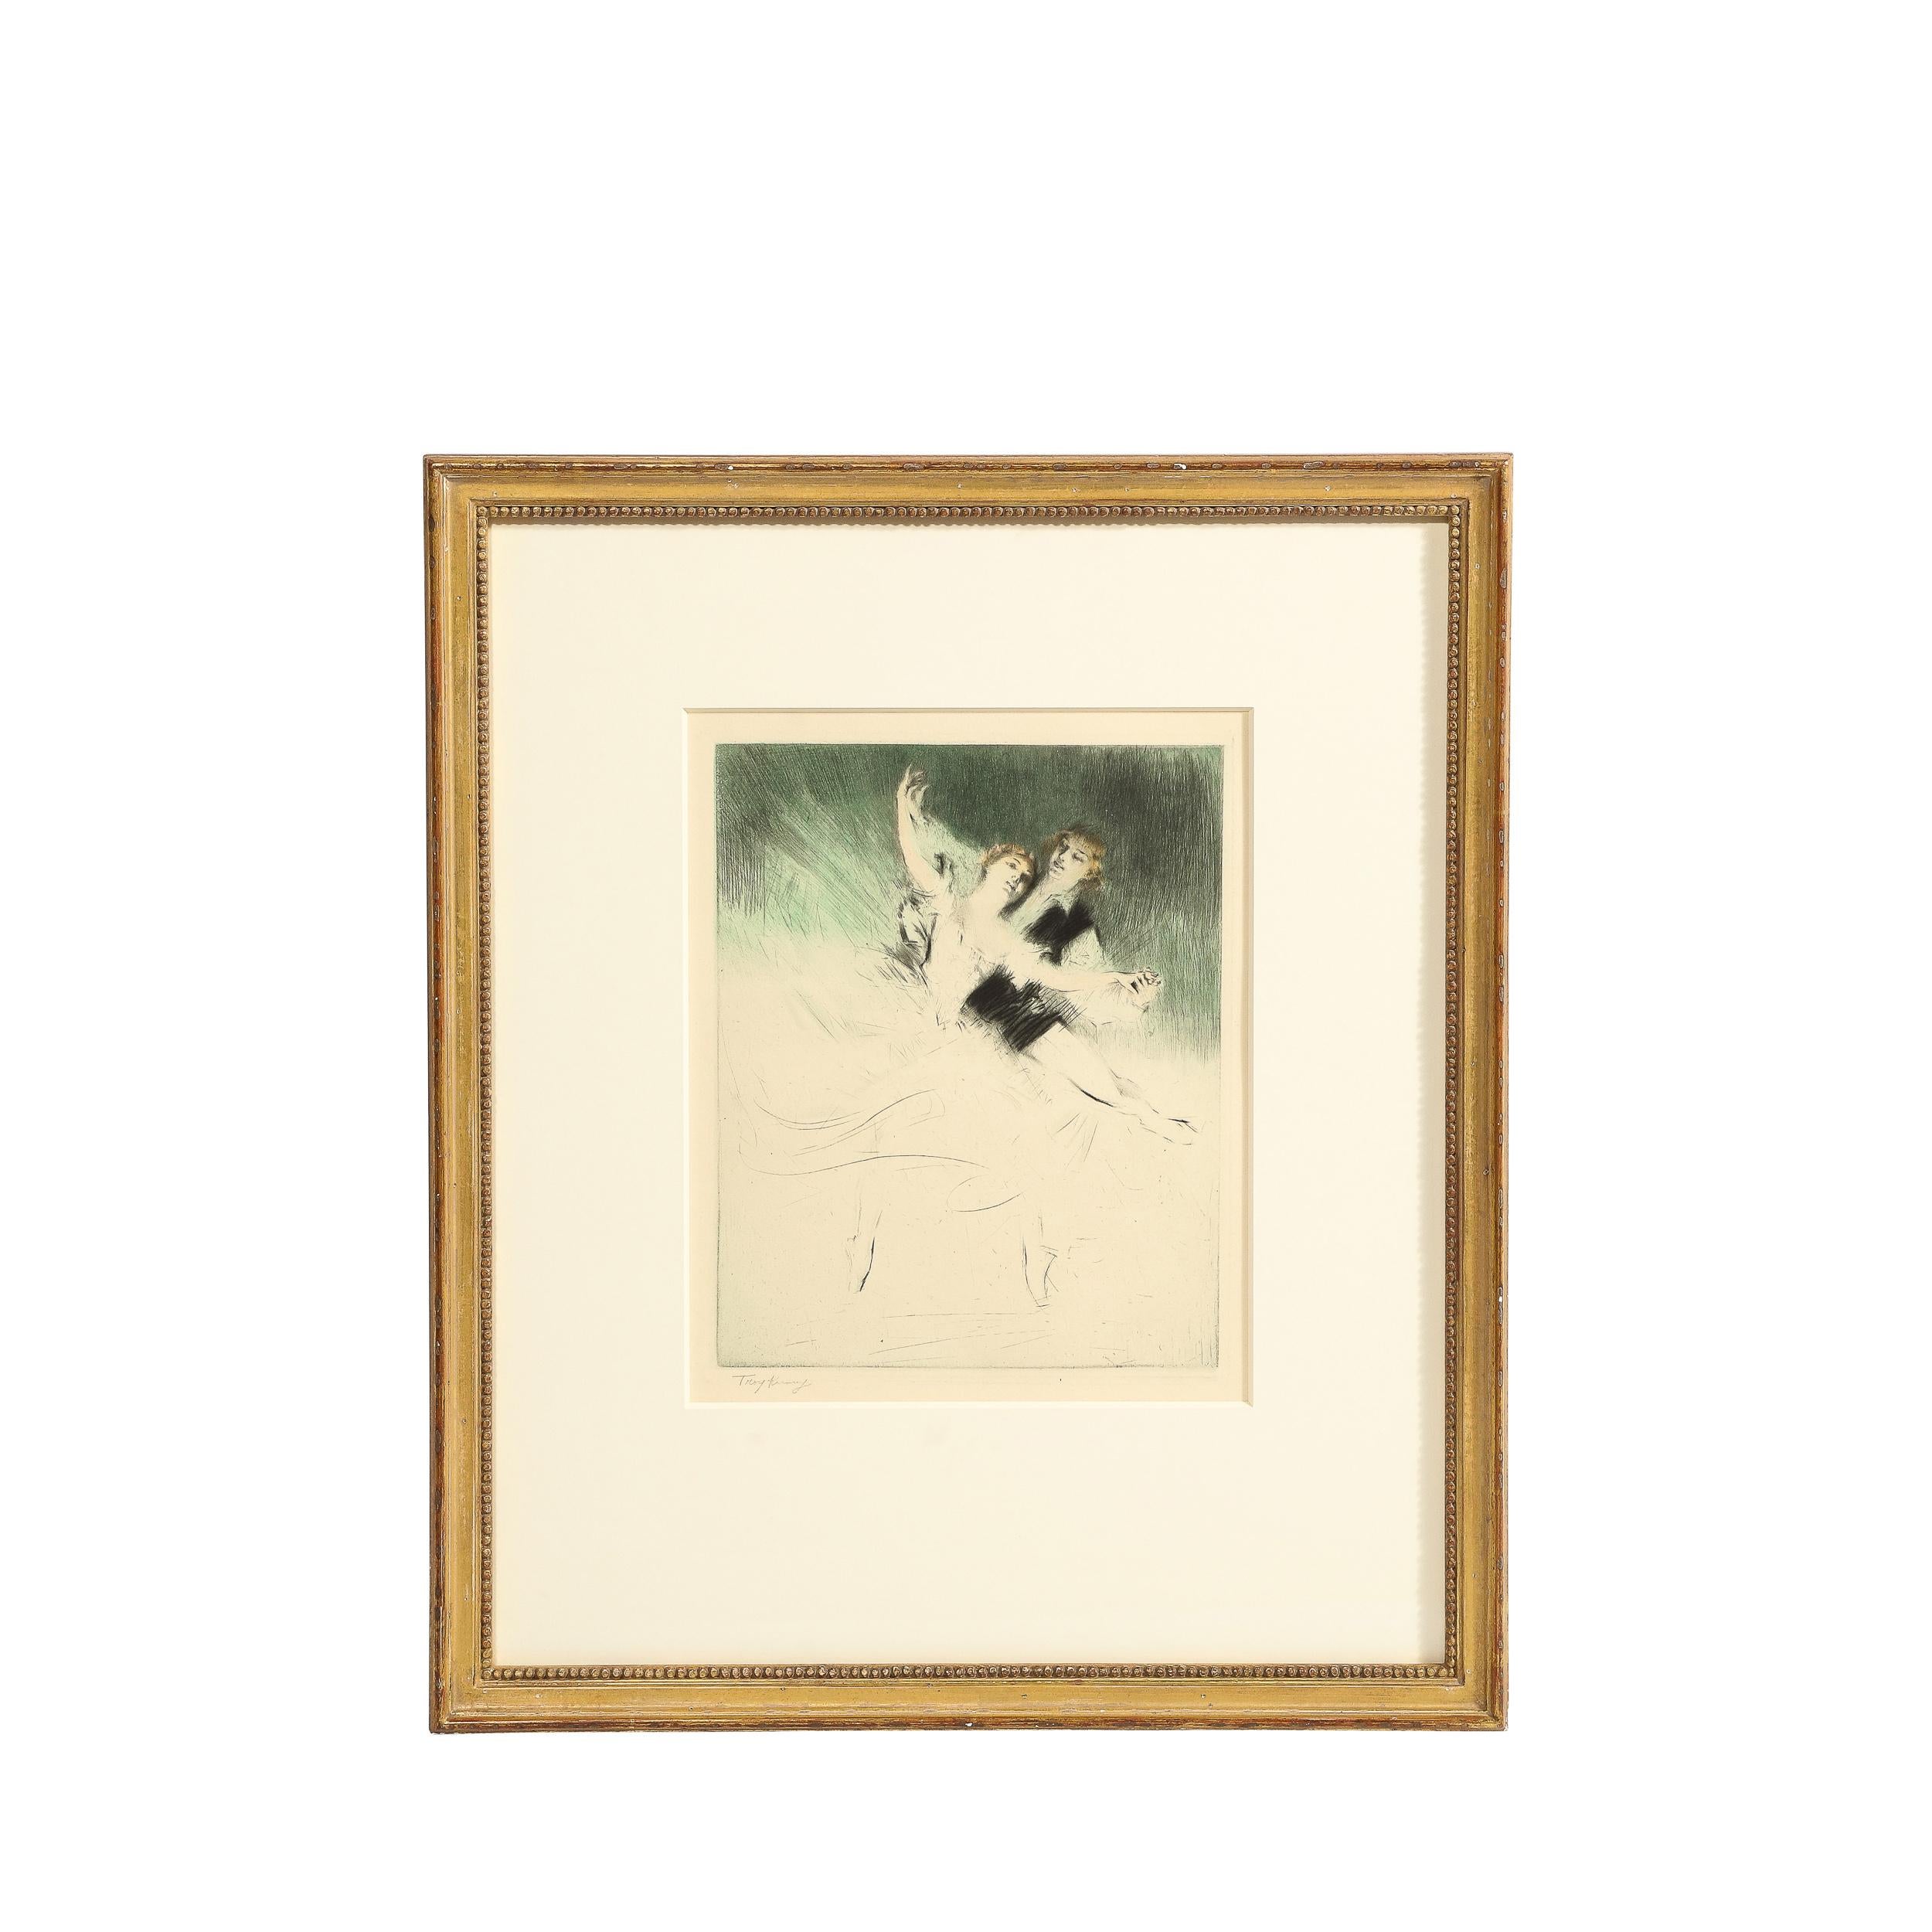 This refined etching and drypoint was realized by the esteemed American artist Troy Kinney in the United States circa 1920. The work features two dancing figures- a woman leaning against the male figure behind her, perhaps moments before being